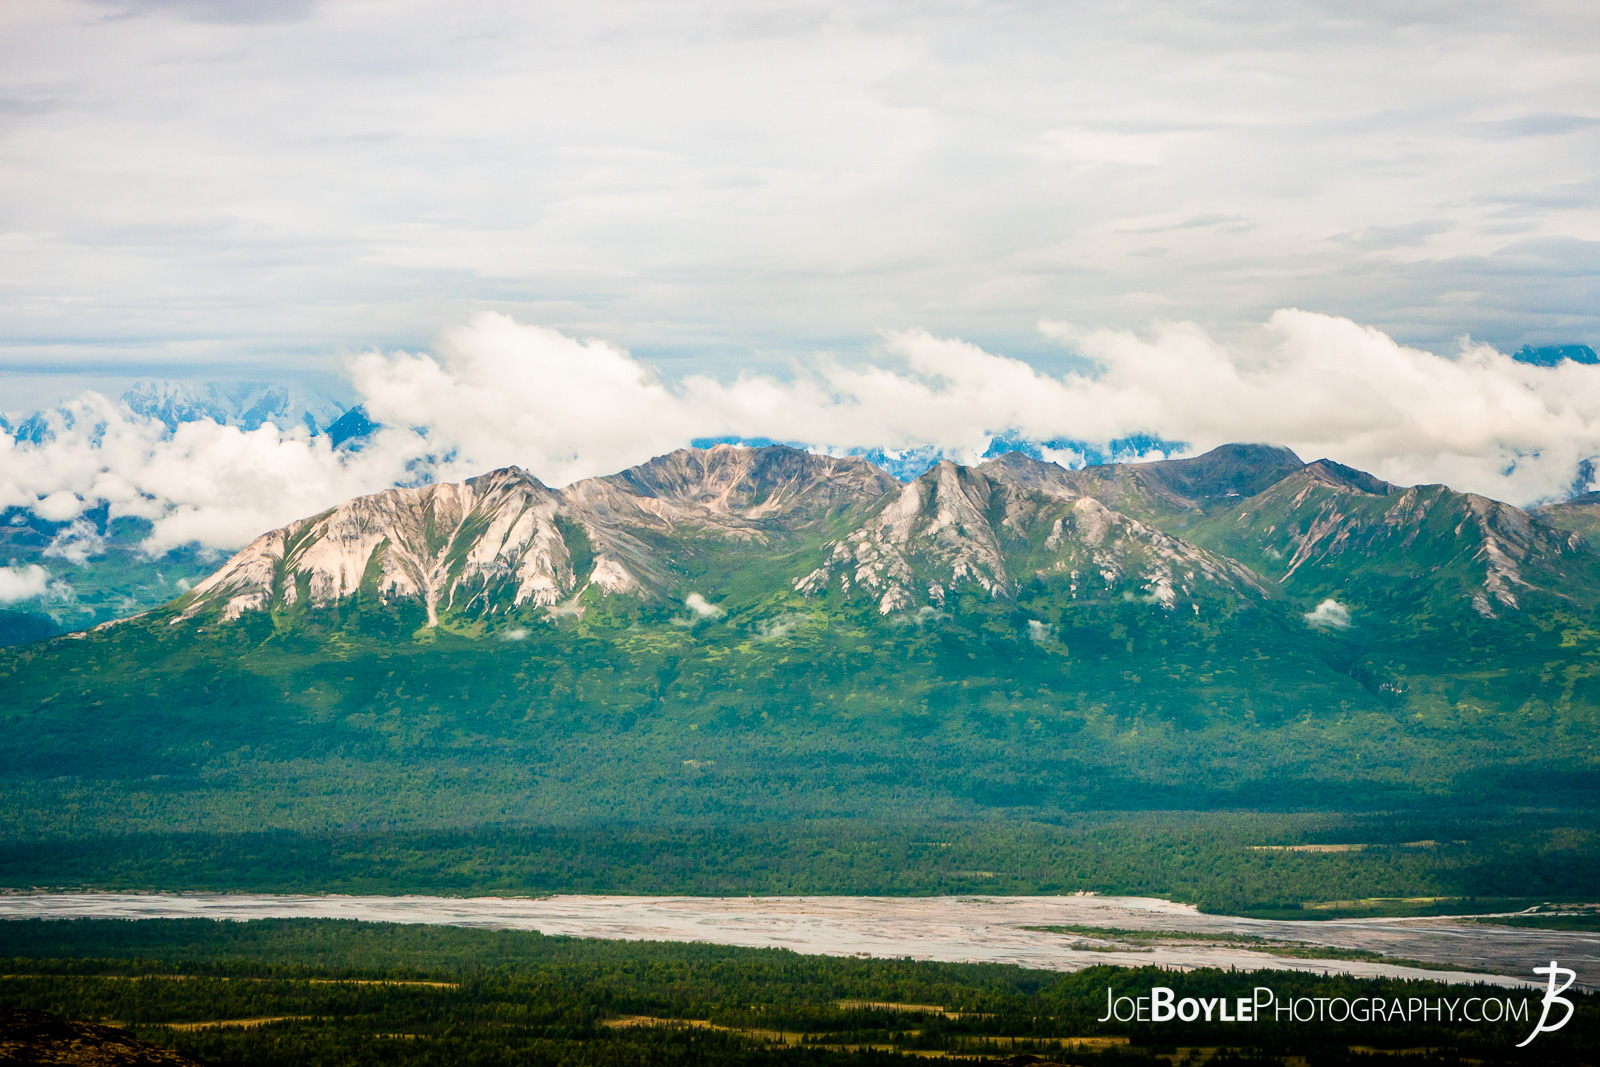  Here is a cool photo of the Alaska mountain range as seen from the Kesugi Ridge Trail. As we hiked the Kesugi Ridge trail, our view of the Alaskan mountain kept changing which provided some really cool views. Somewhere, tucked behind those clouds Mount McKinley is hiding! 